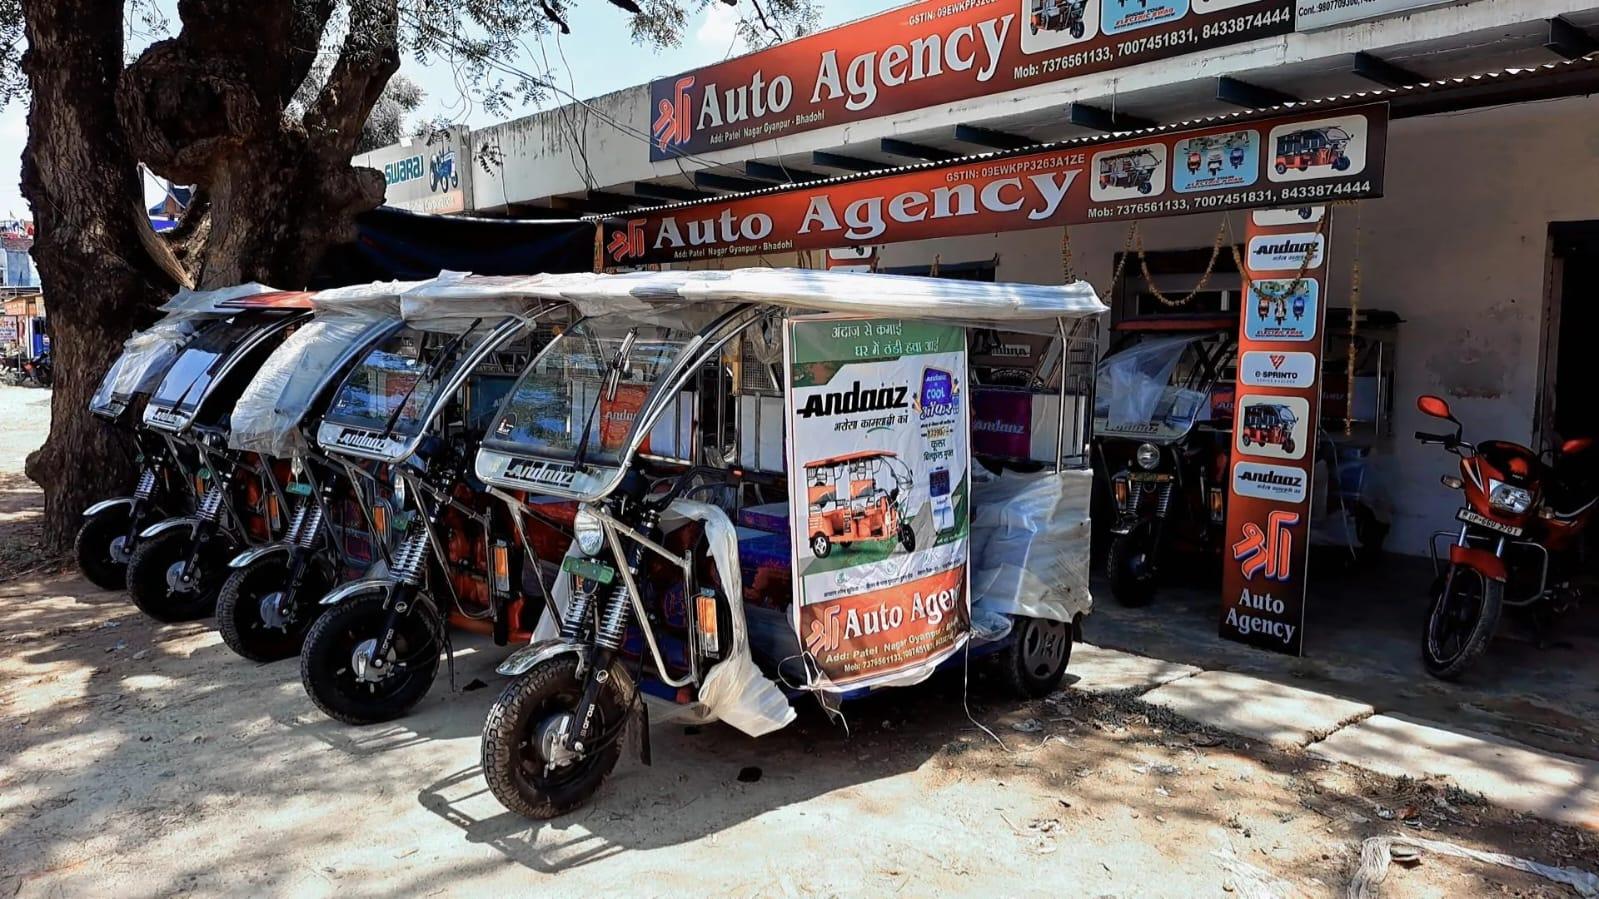 श्री Auto Agency